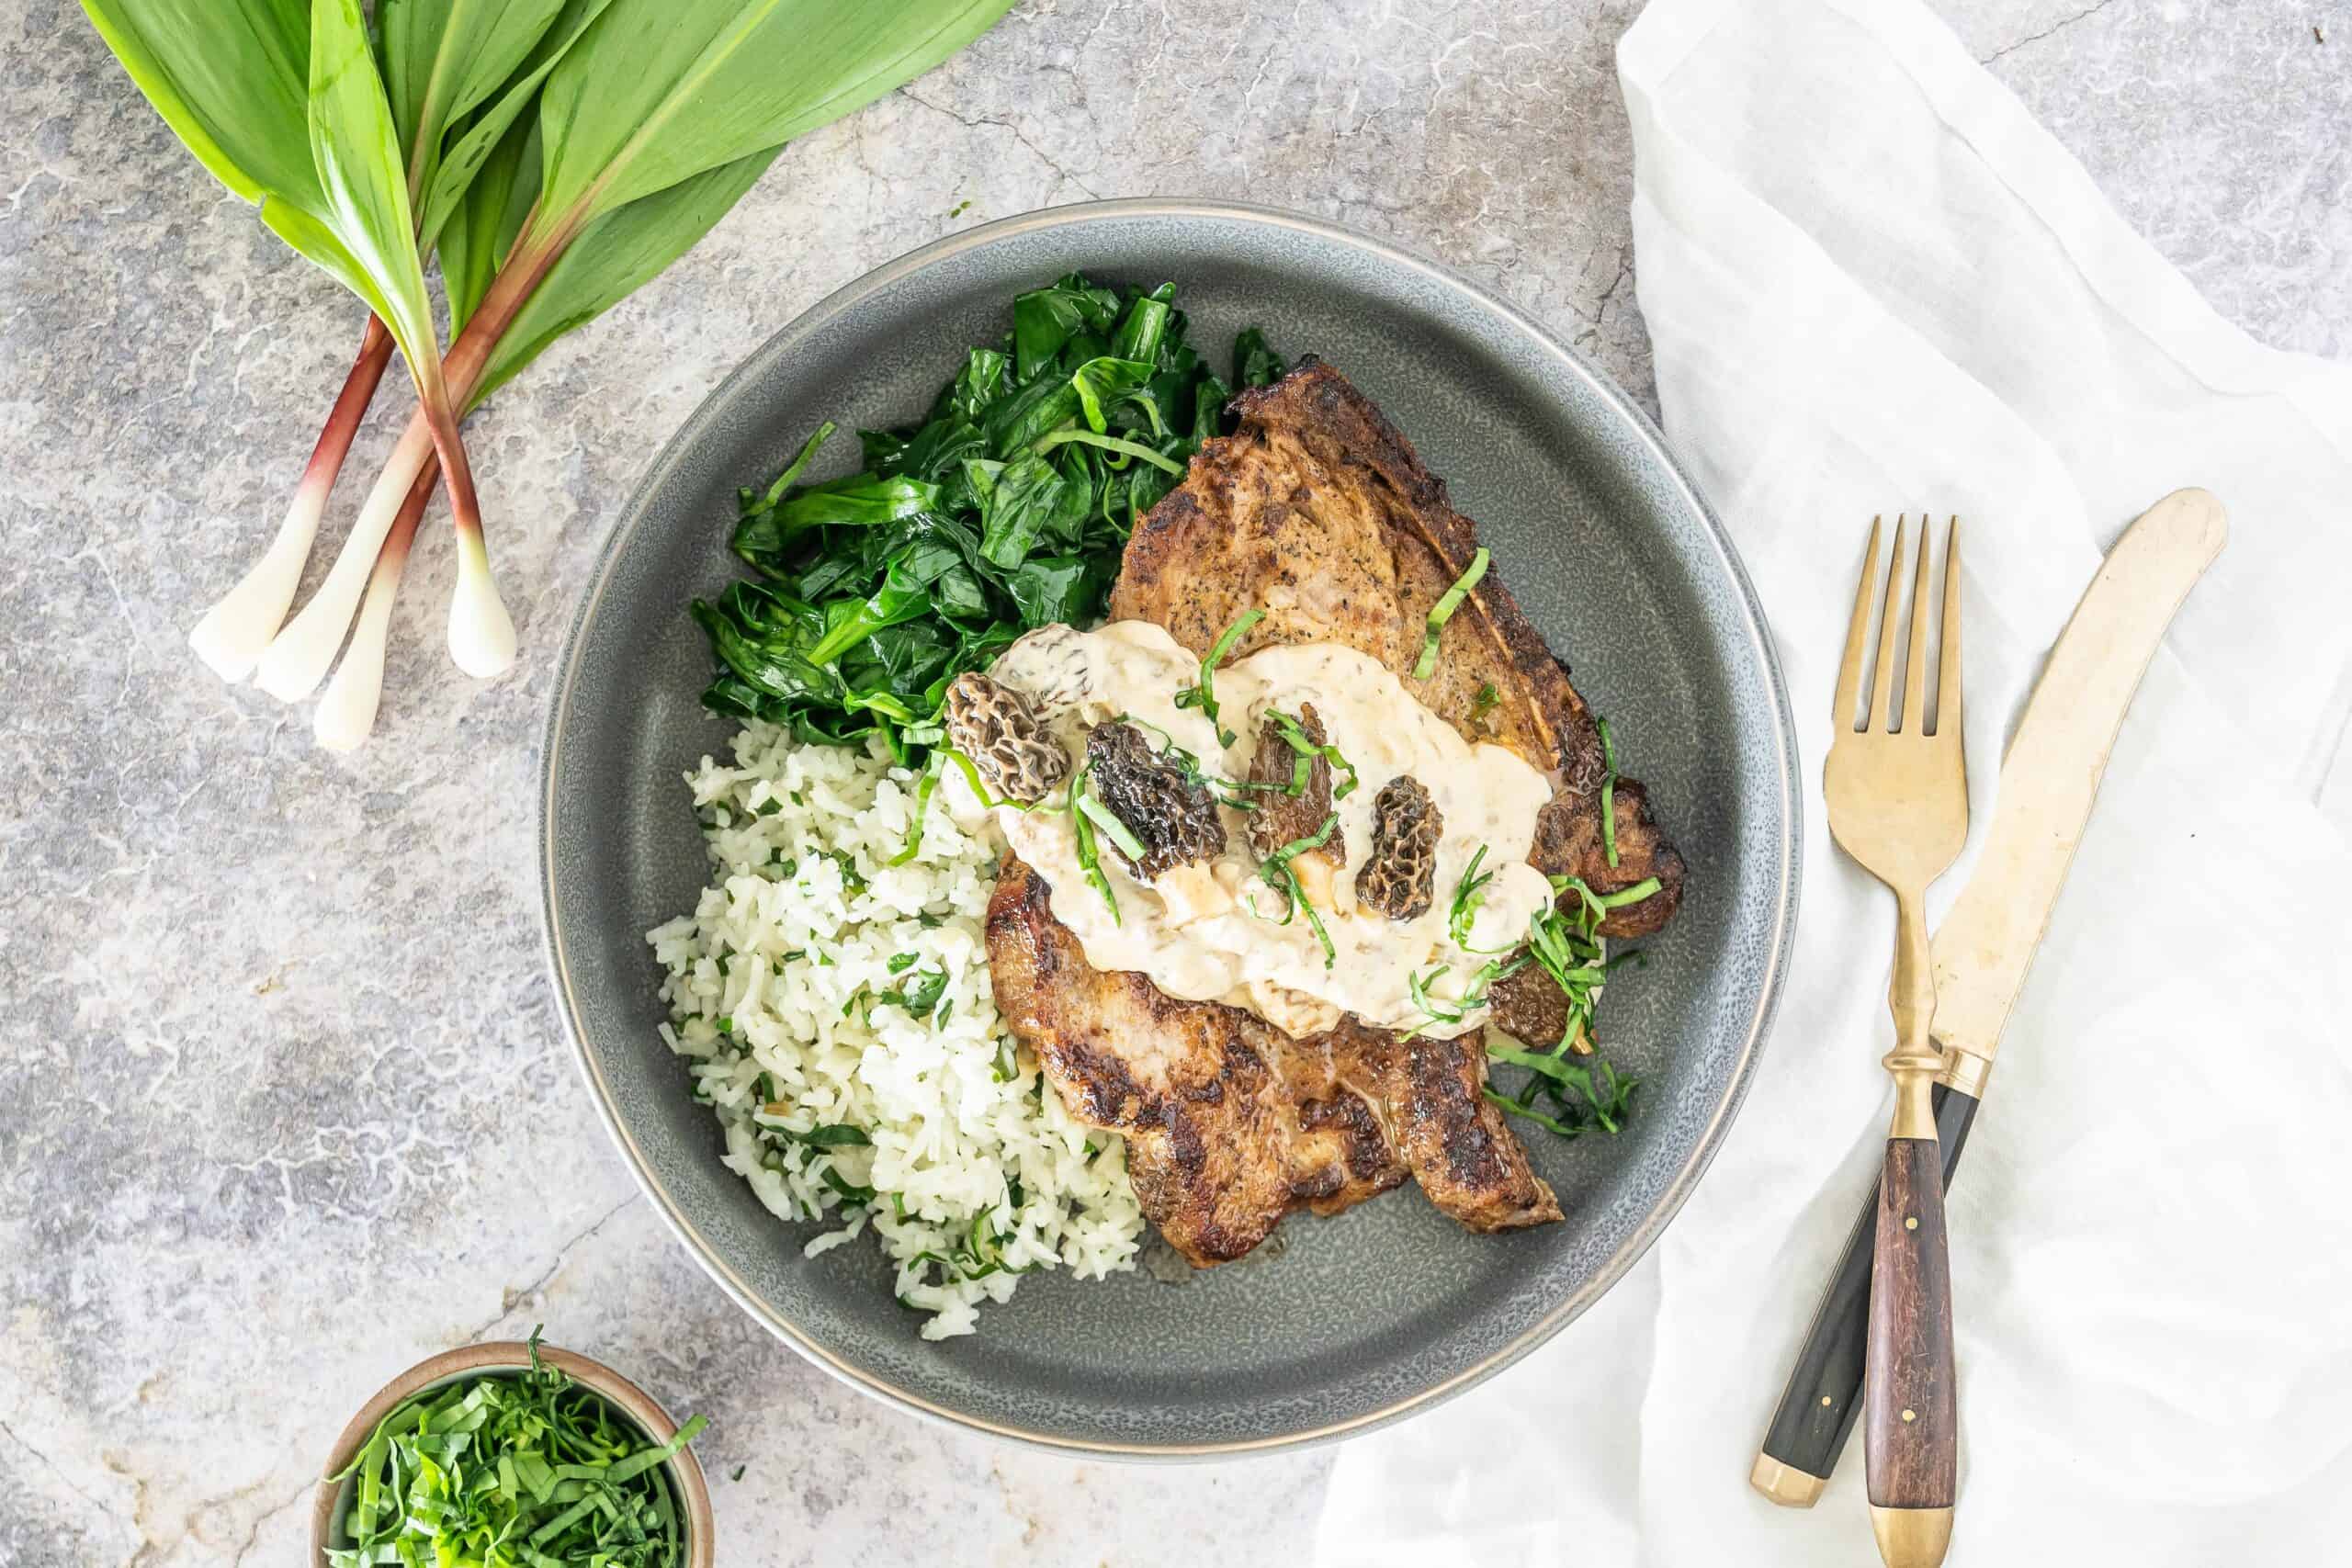 gray background with a gray bowl, holding sautéed green, rice and pork chops topped with a parmesan sauce with ramps and morels